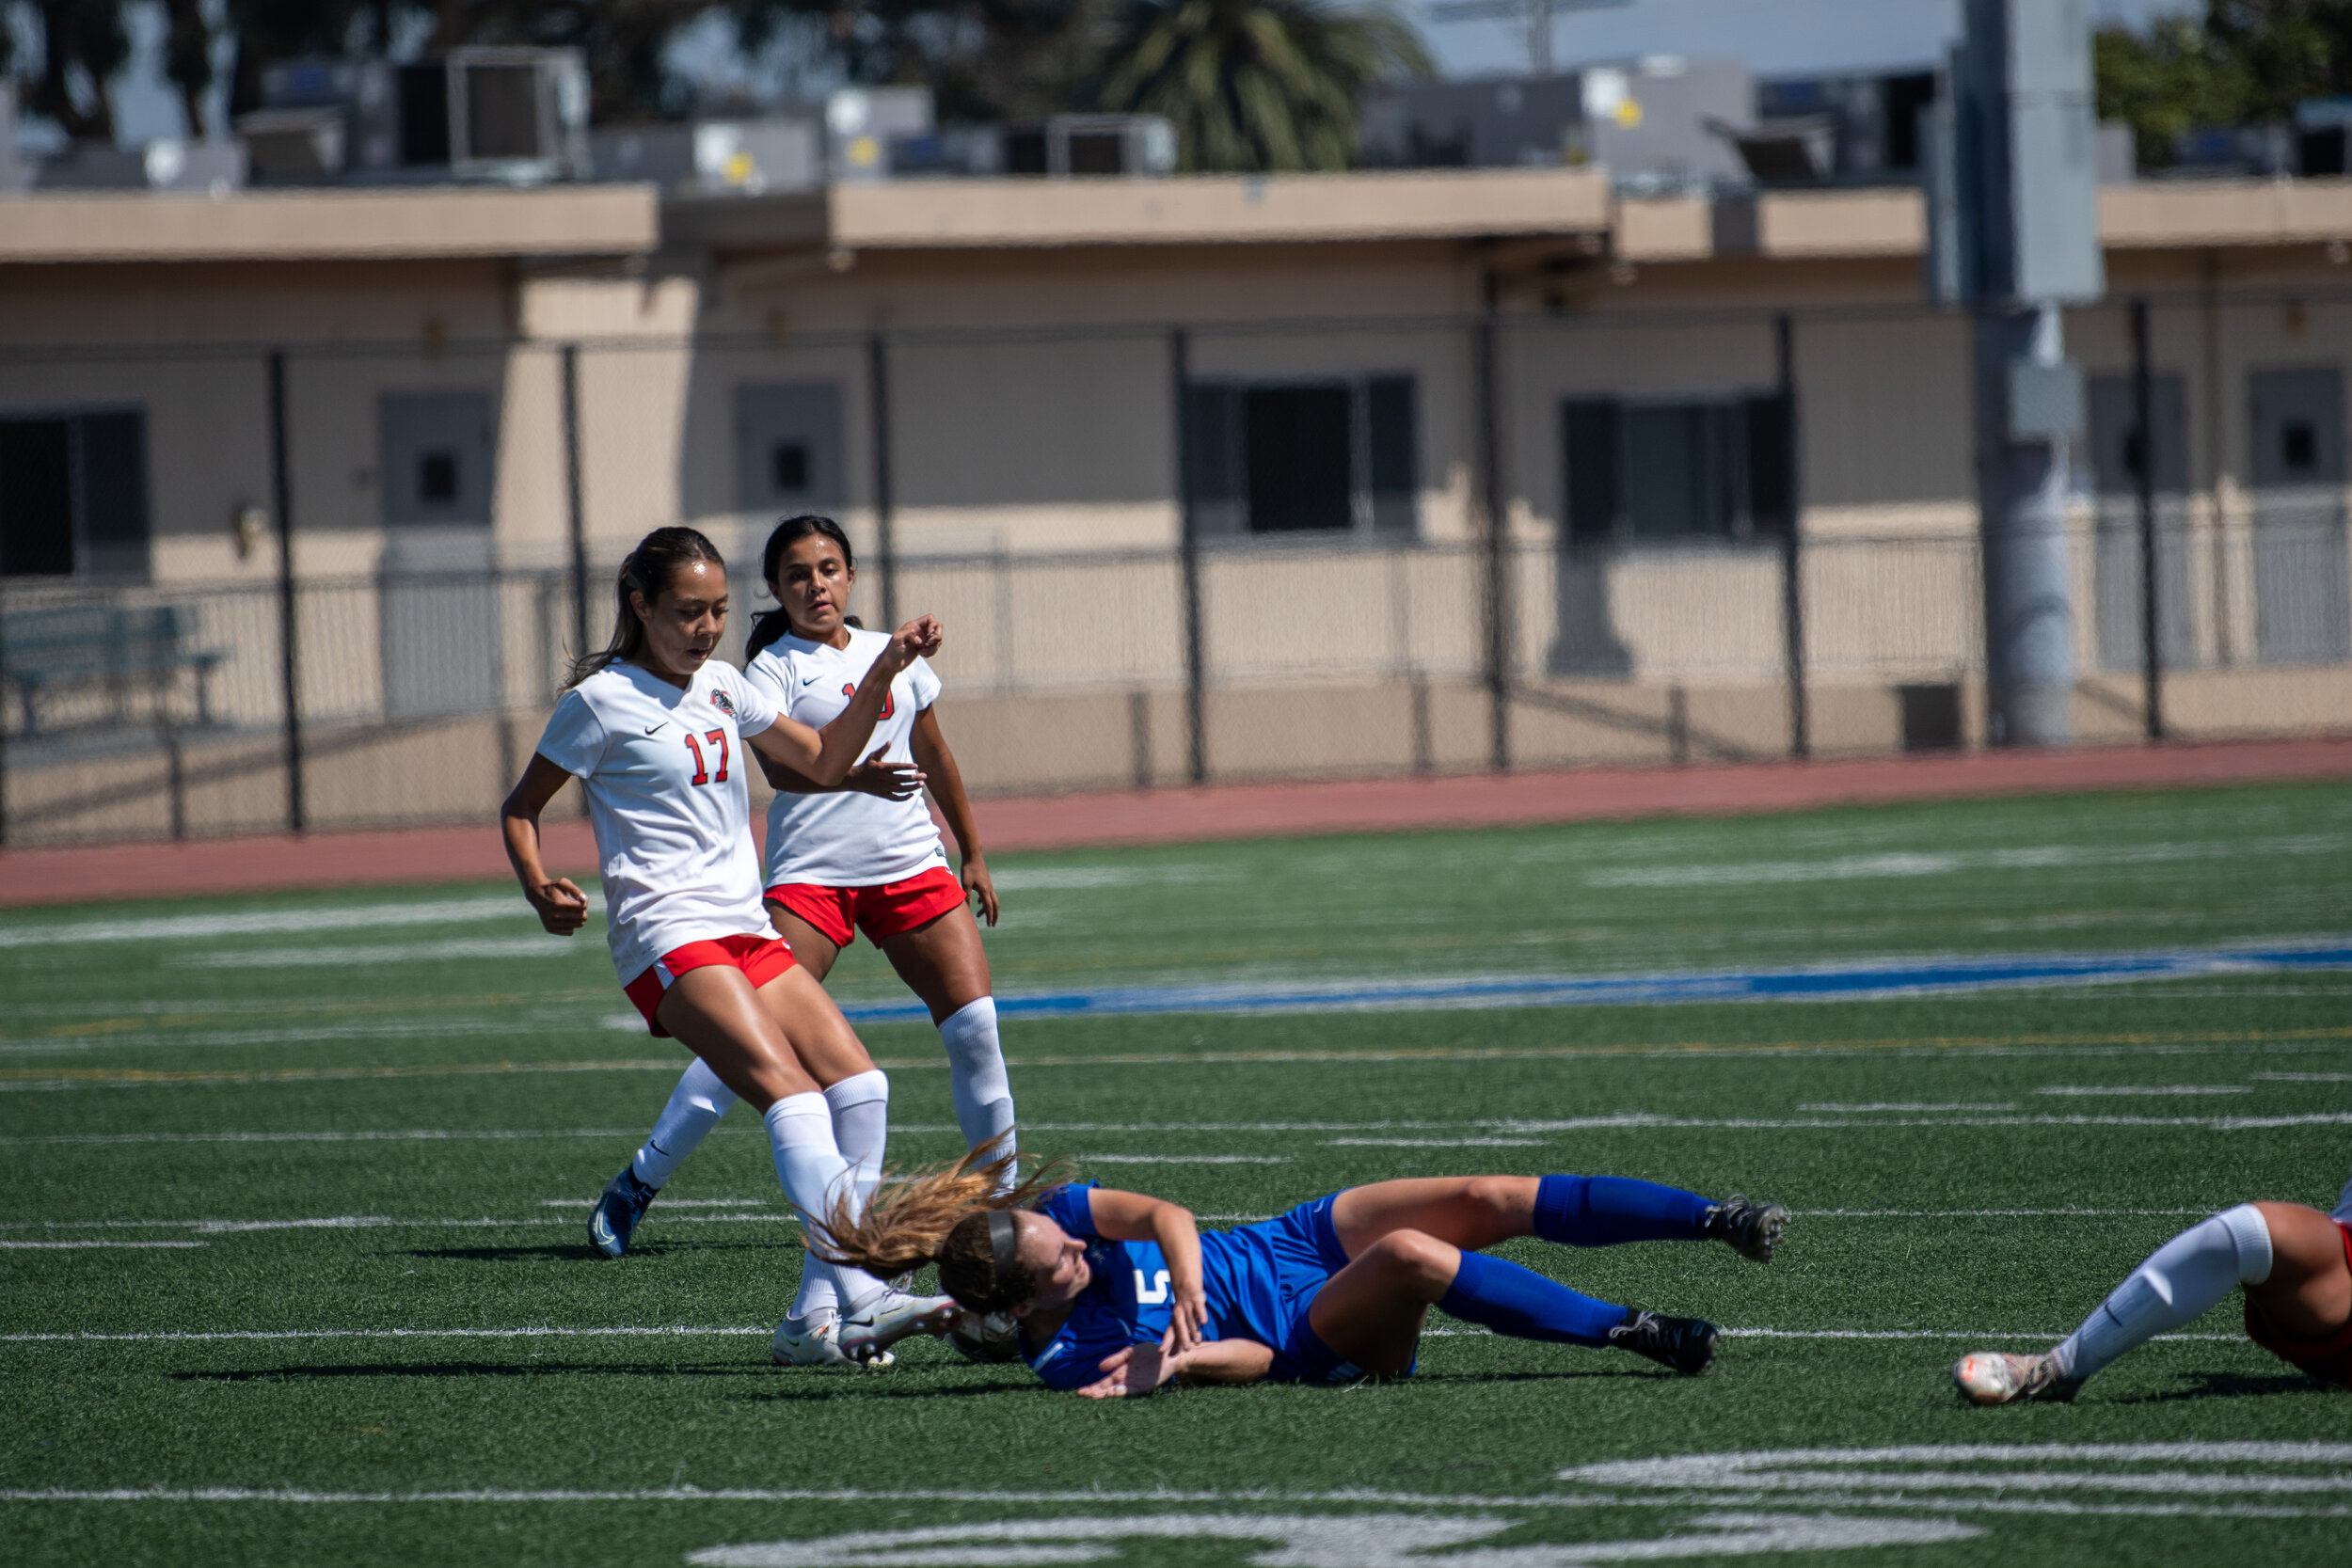  Charlie Kayem of the Santa Monica College woman's soccer team is seriously fouled by Charlie College team members on the Santa Monica College Corsair Field in Santa Monica, Calif. on September 10, 2021. The match against Chaffey is their third game 